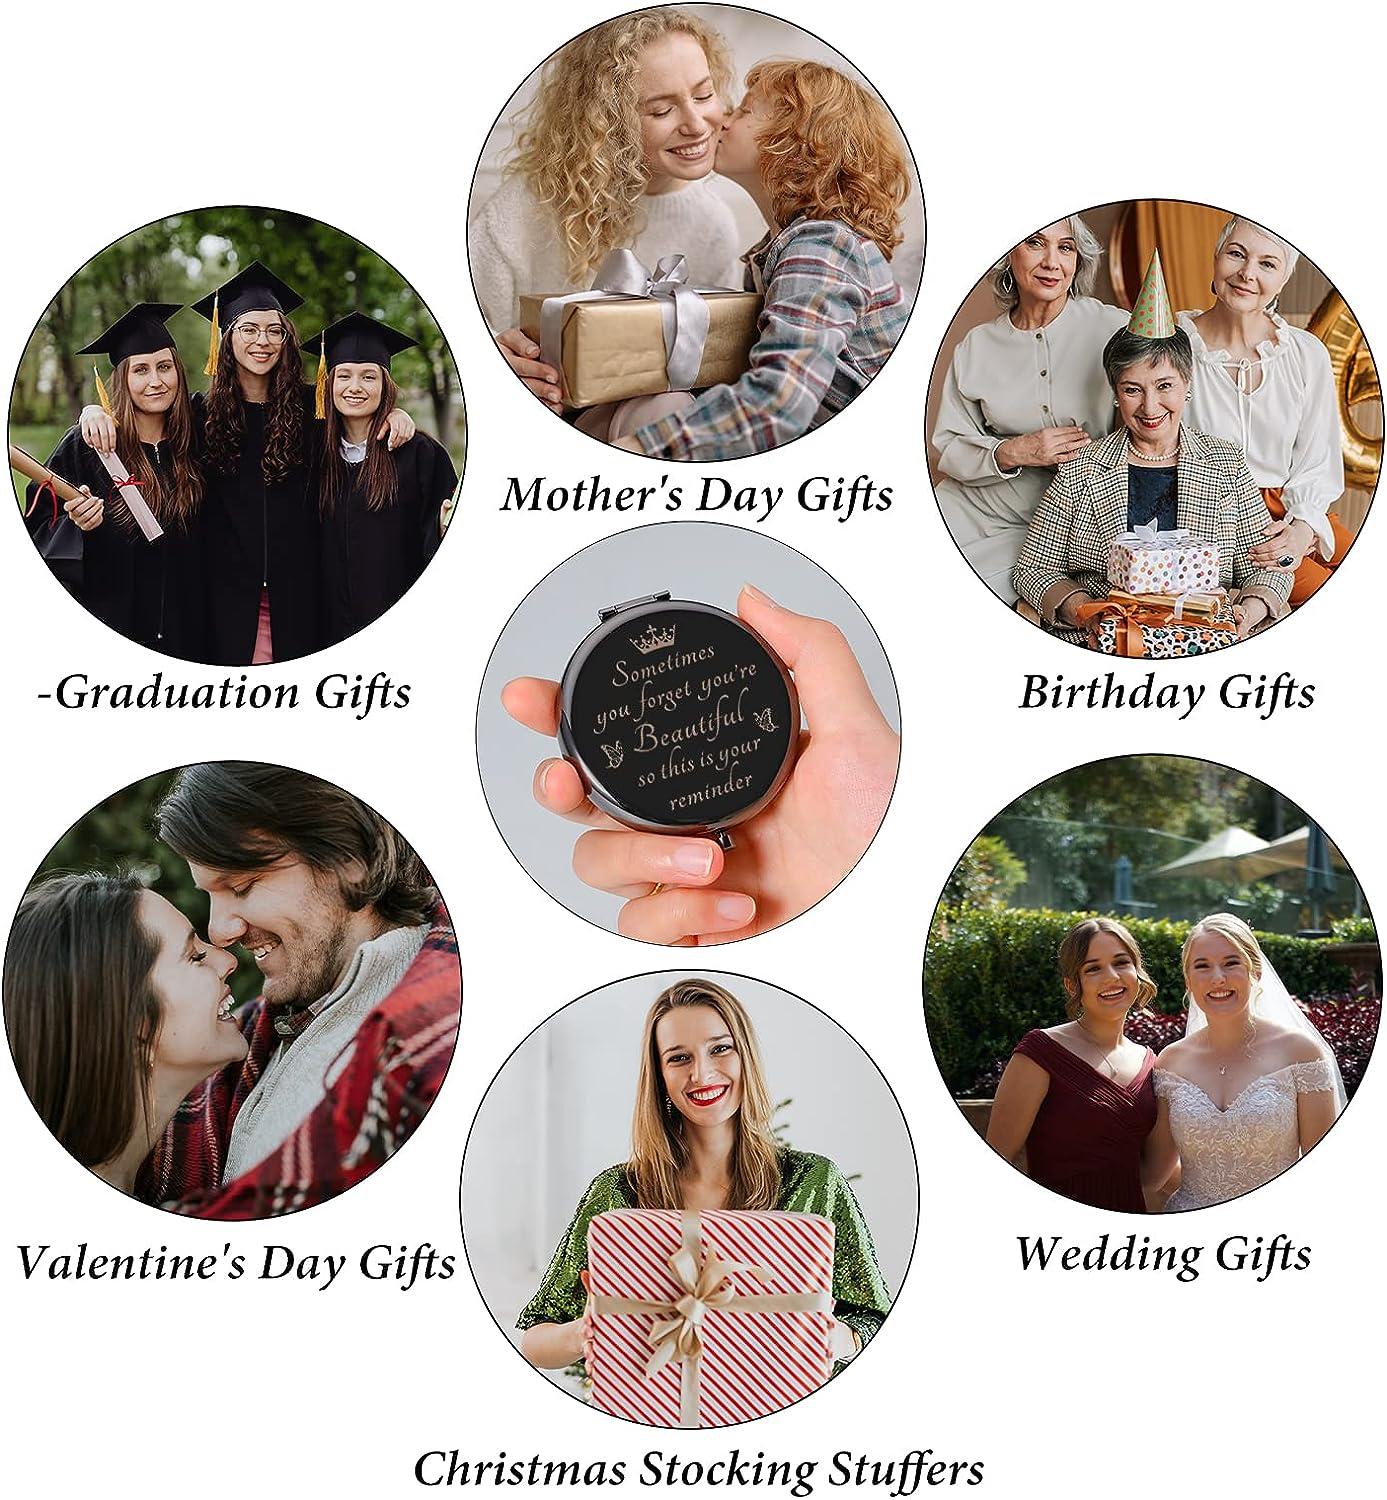 Funny Gifts for Friends Sister, Long Distance Friendship Gifts, Graduation  Gifts for Her - Travel Makeup Mirror, Cute Small Christmas Farewell Gifts